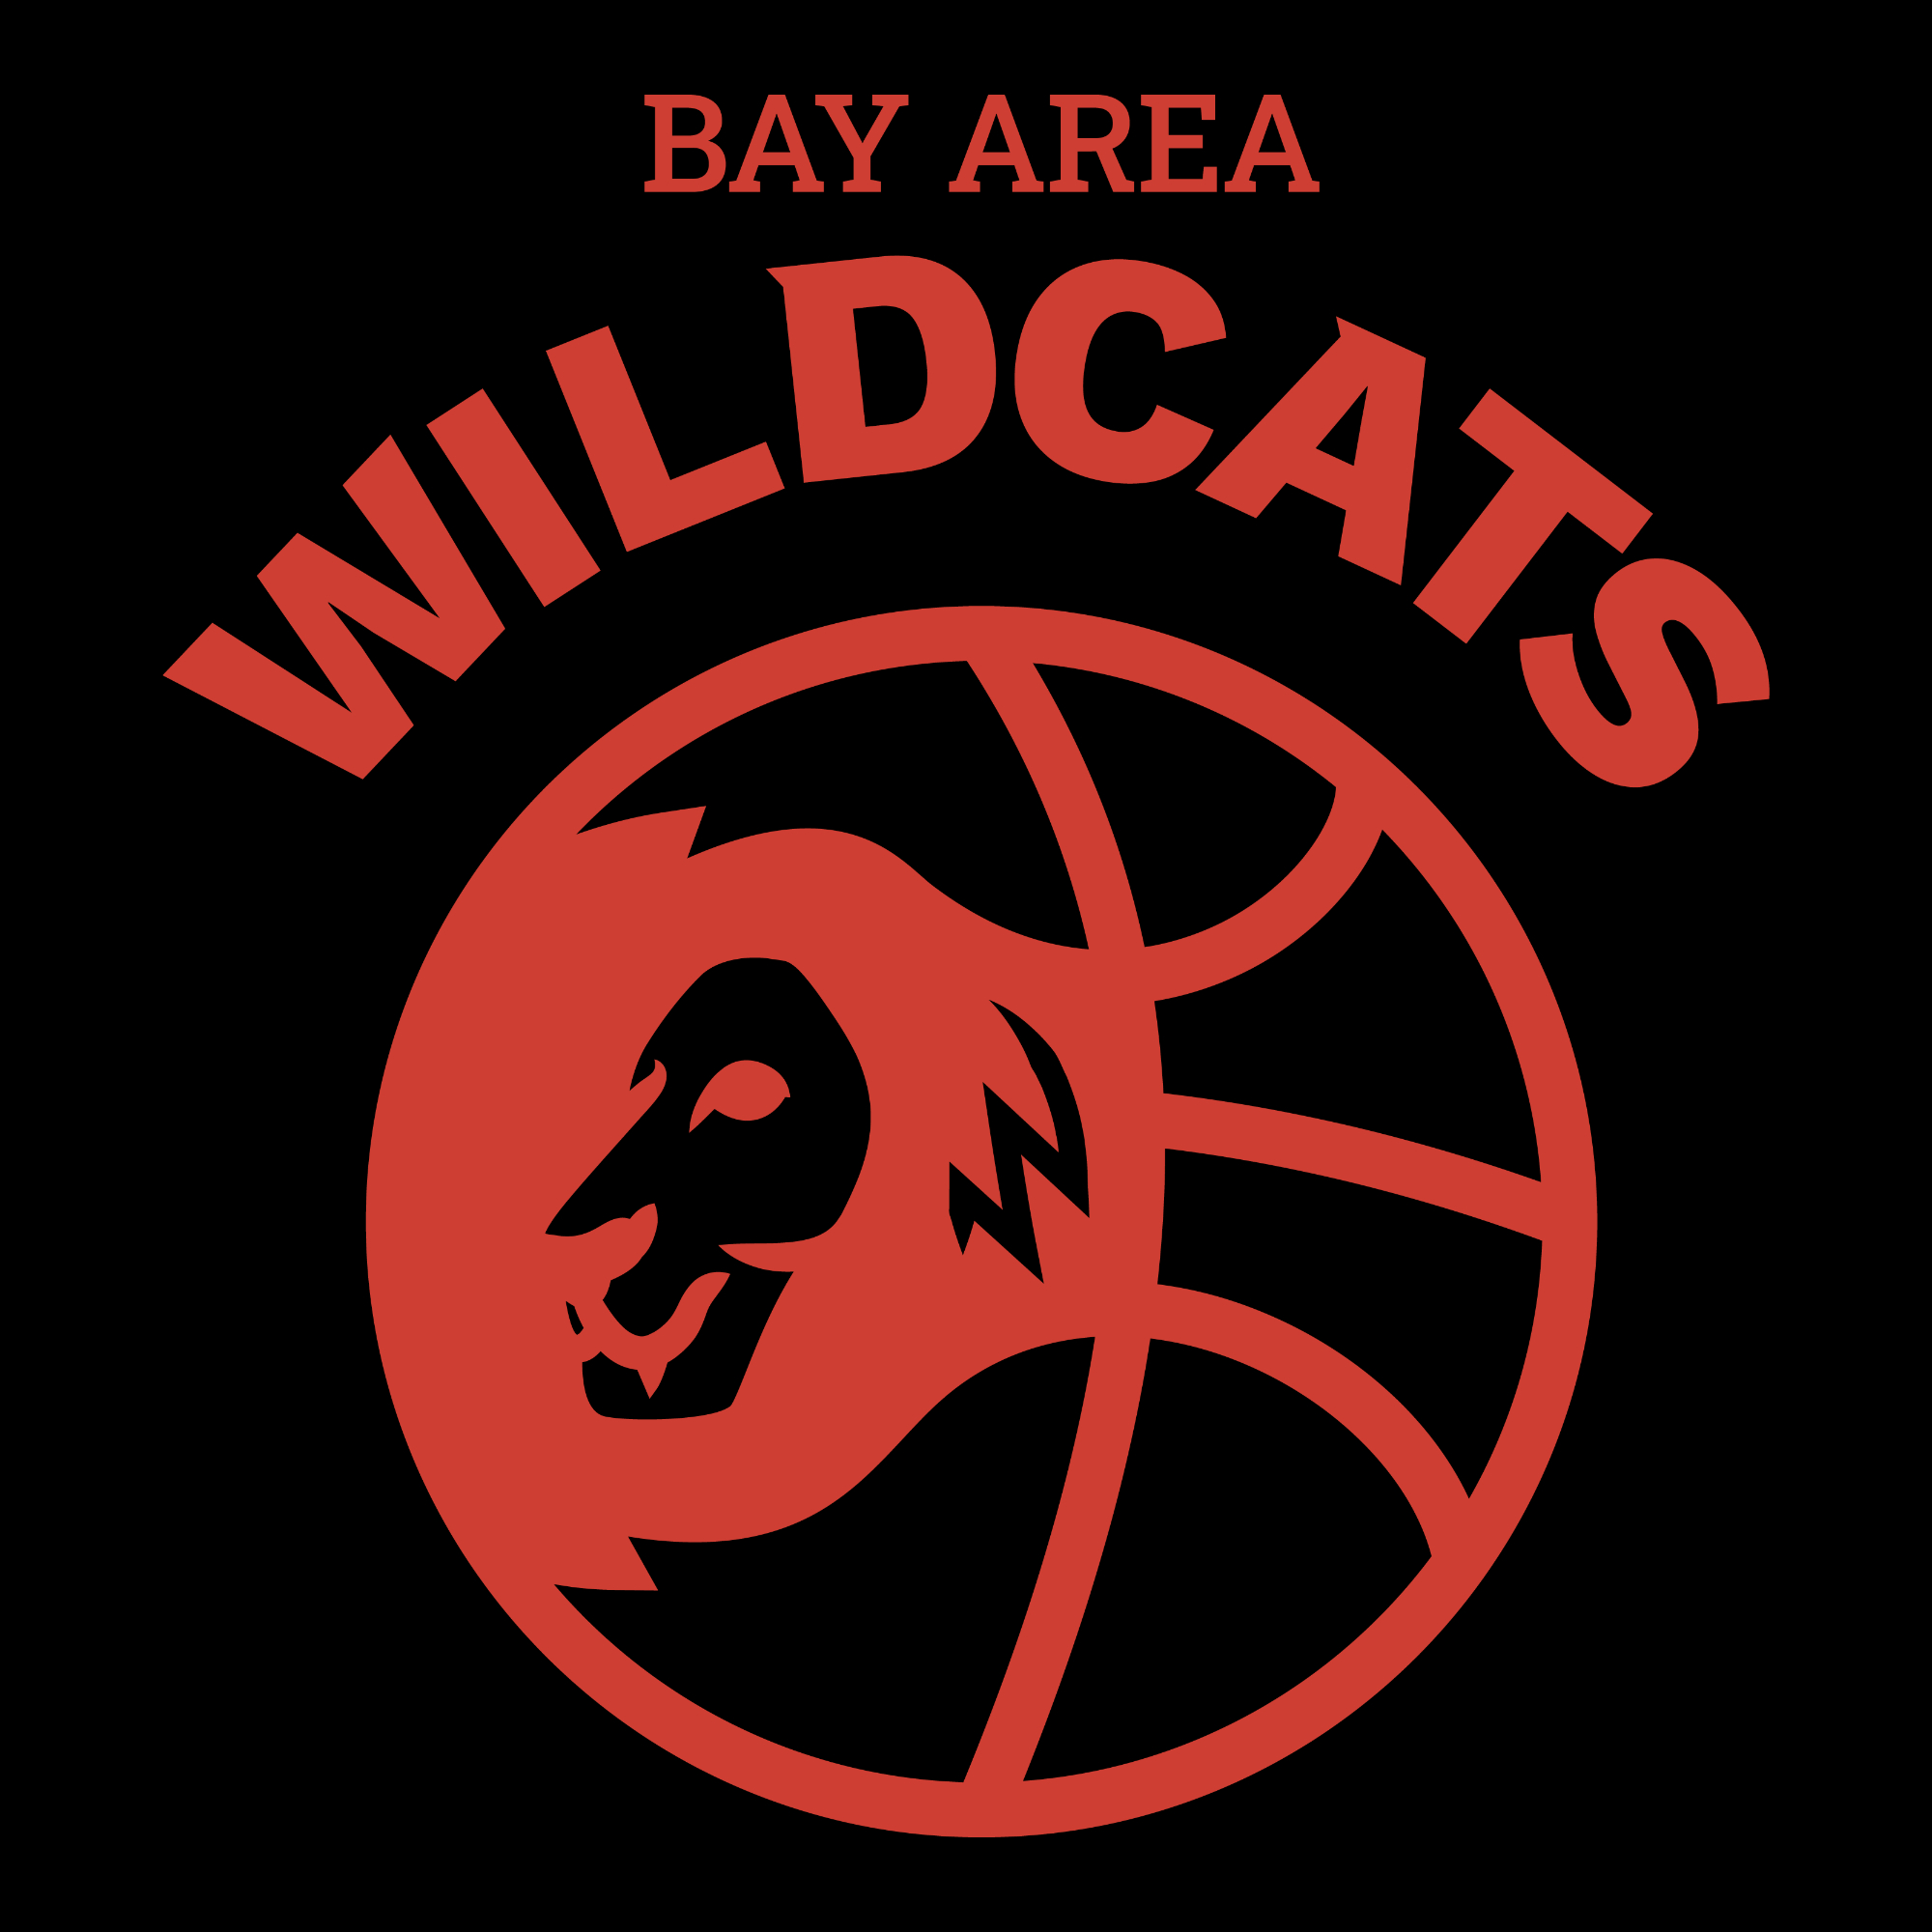 The official logo of Bay Area Wildcats Academy